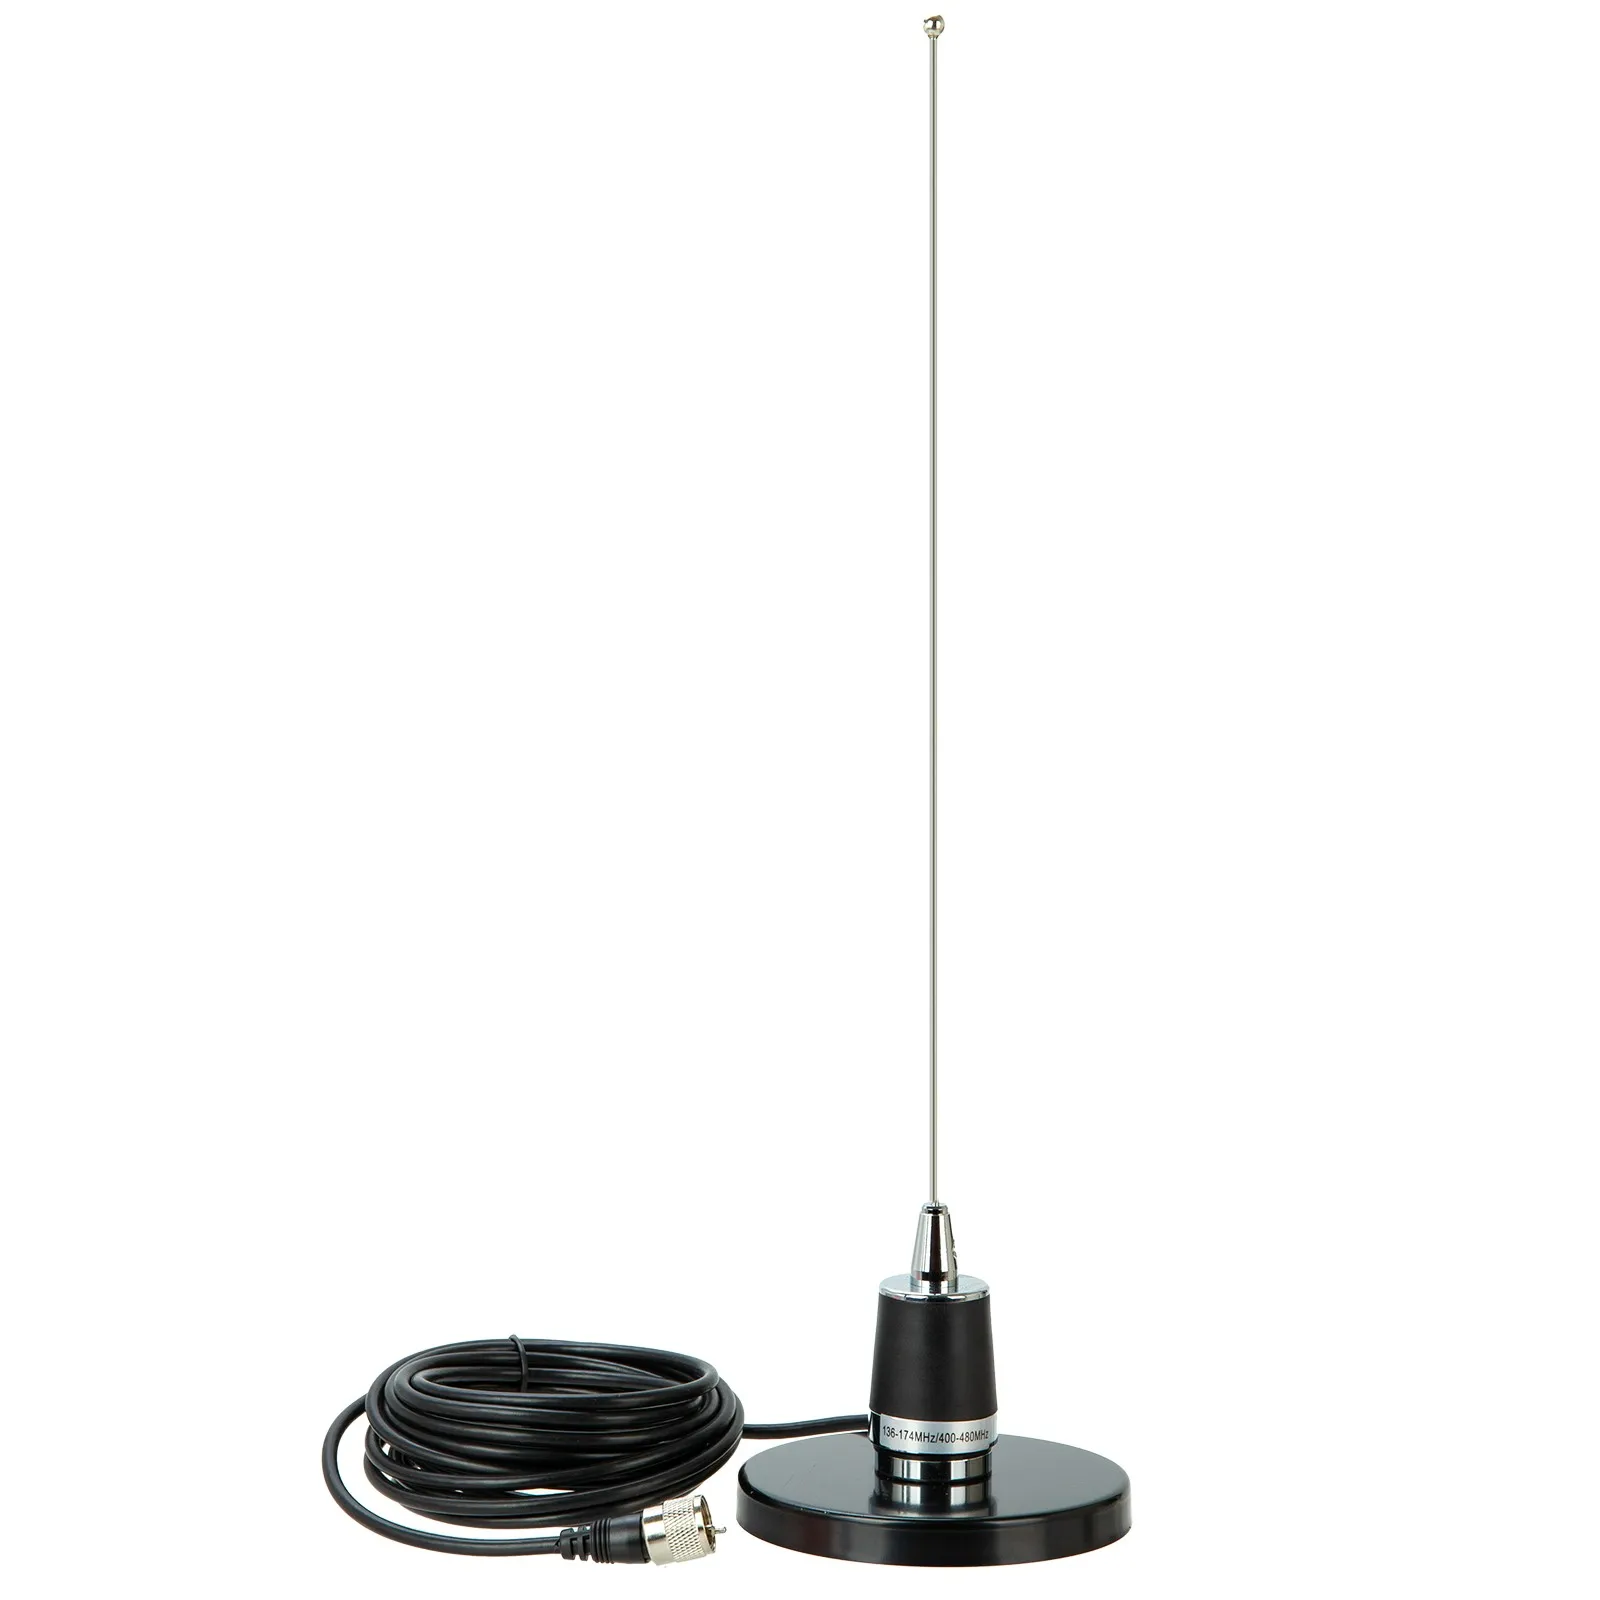 

NMO Antenna with NB-120 12CM NMO Magnetic Mount Base With 5M PL-259 Connector Coaxial RG-58 Cable For QYT TYT Car Mobile Radio